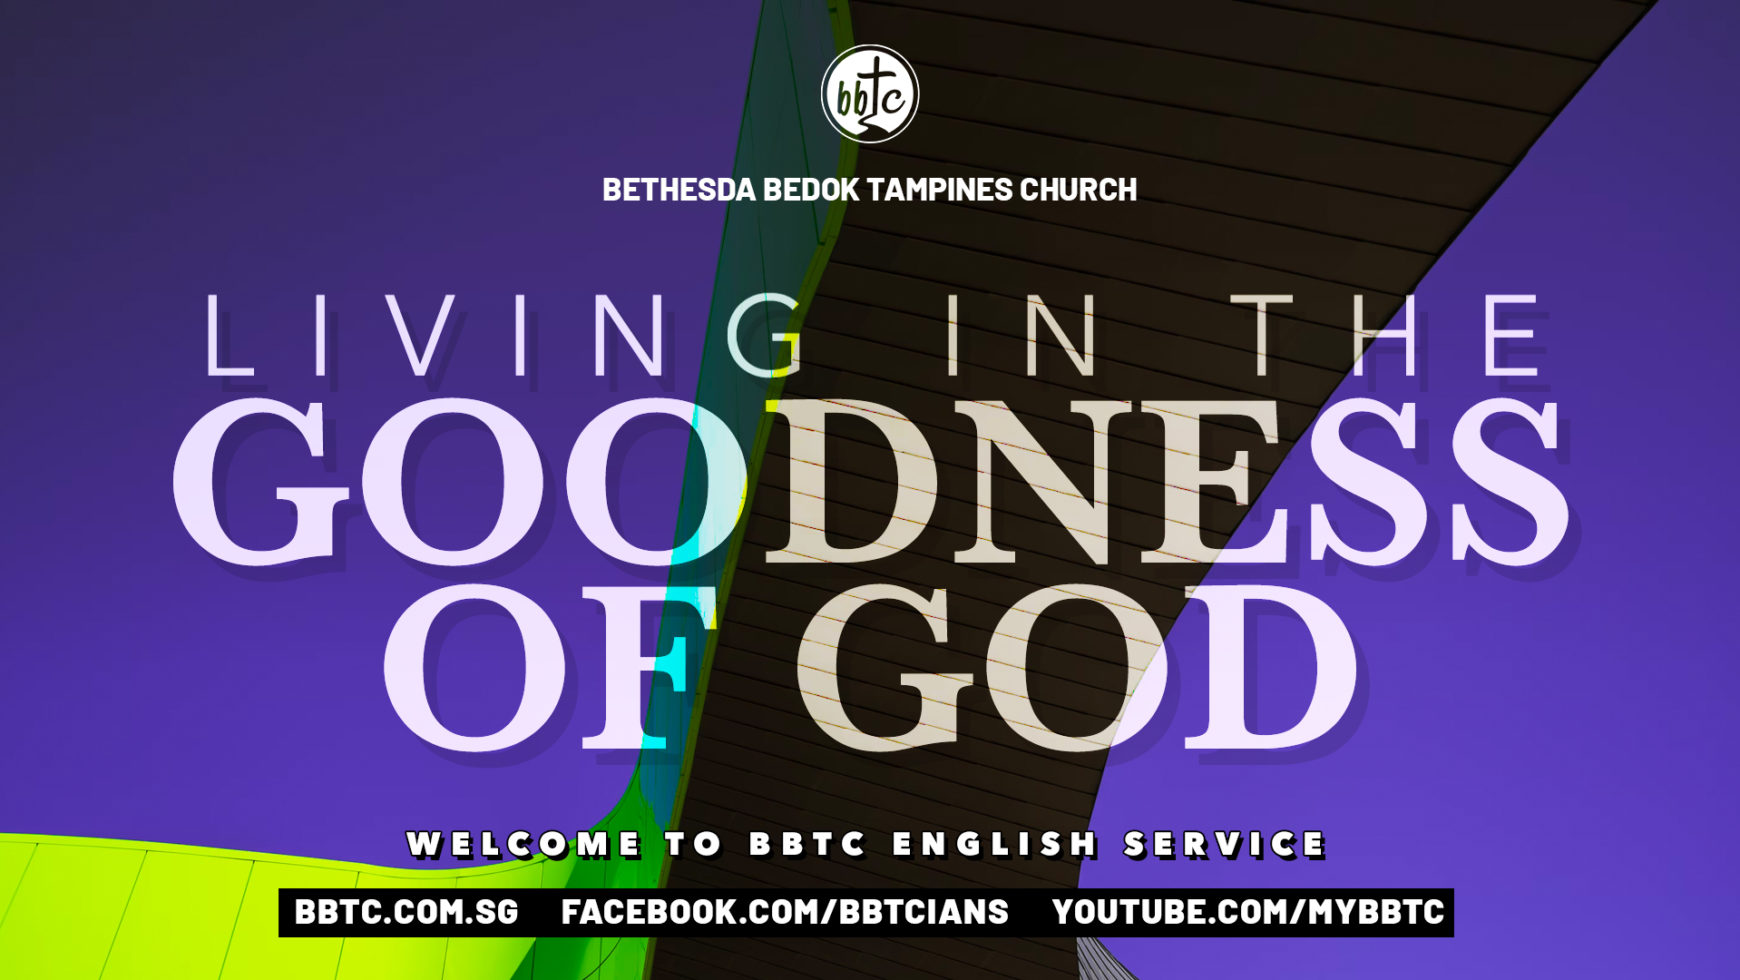 LIVING IN THE GOODNESS OF GOD